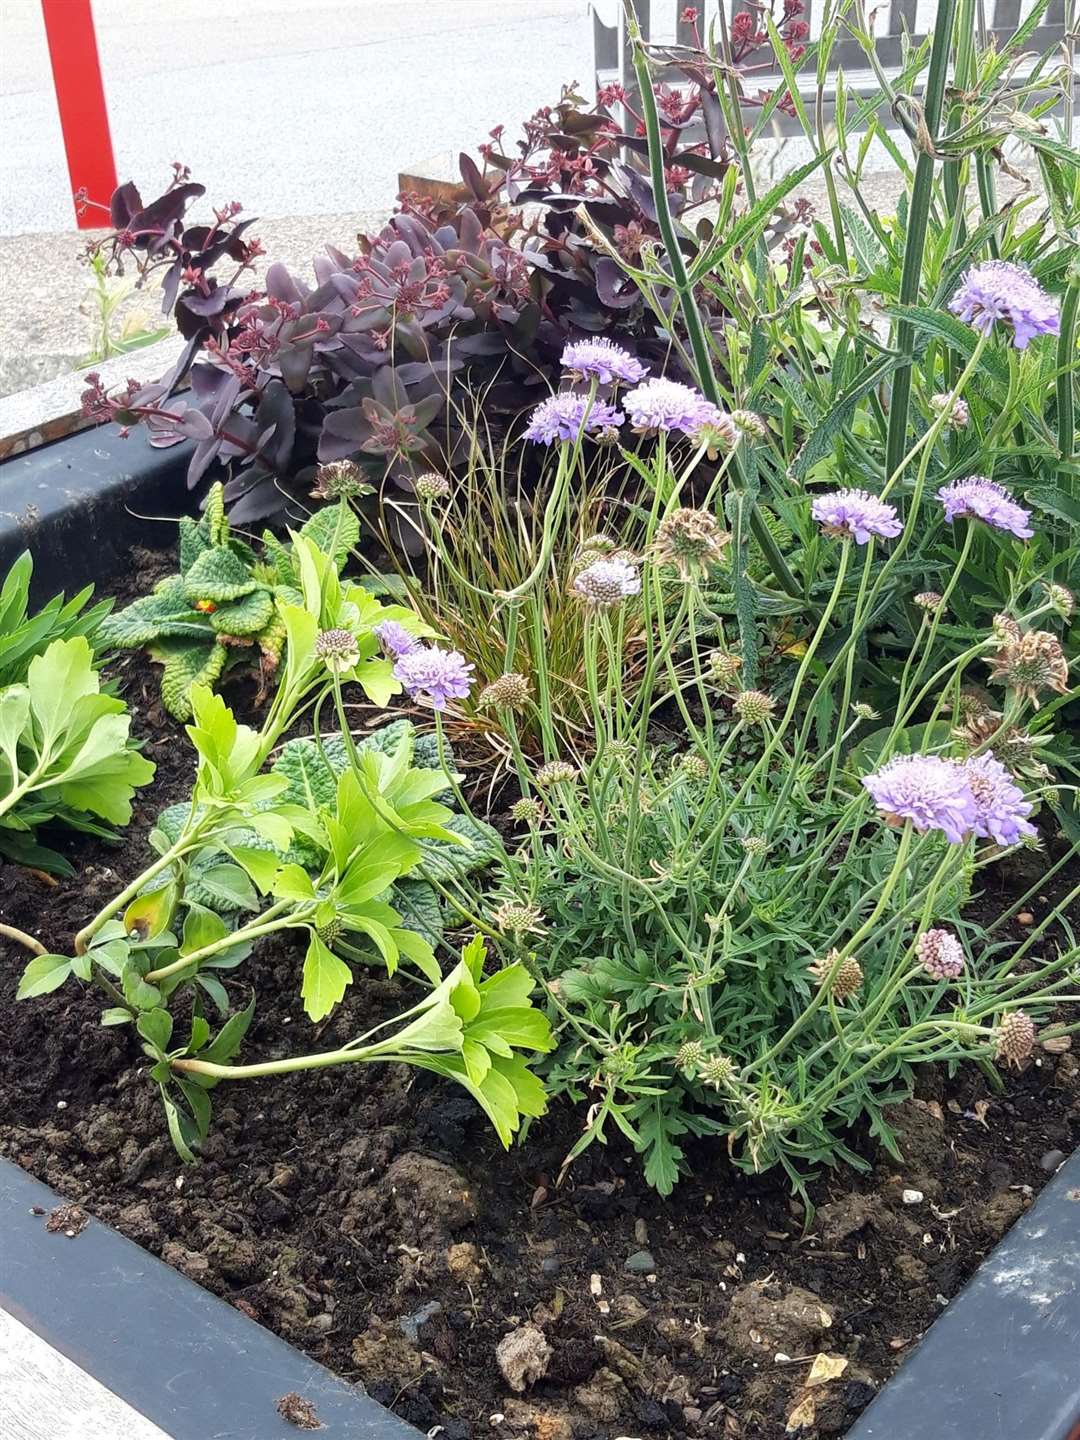 The sustainable planting has been a success for Deal Town Council. Pictures Susan Carlyle